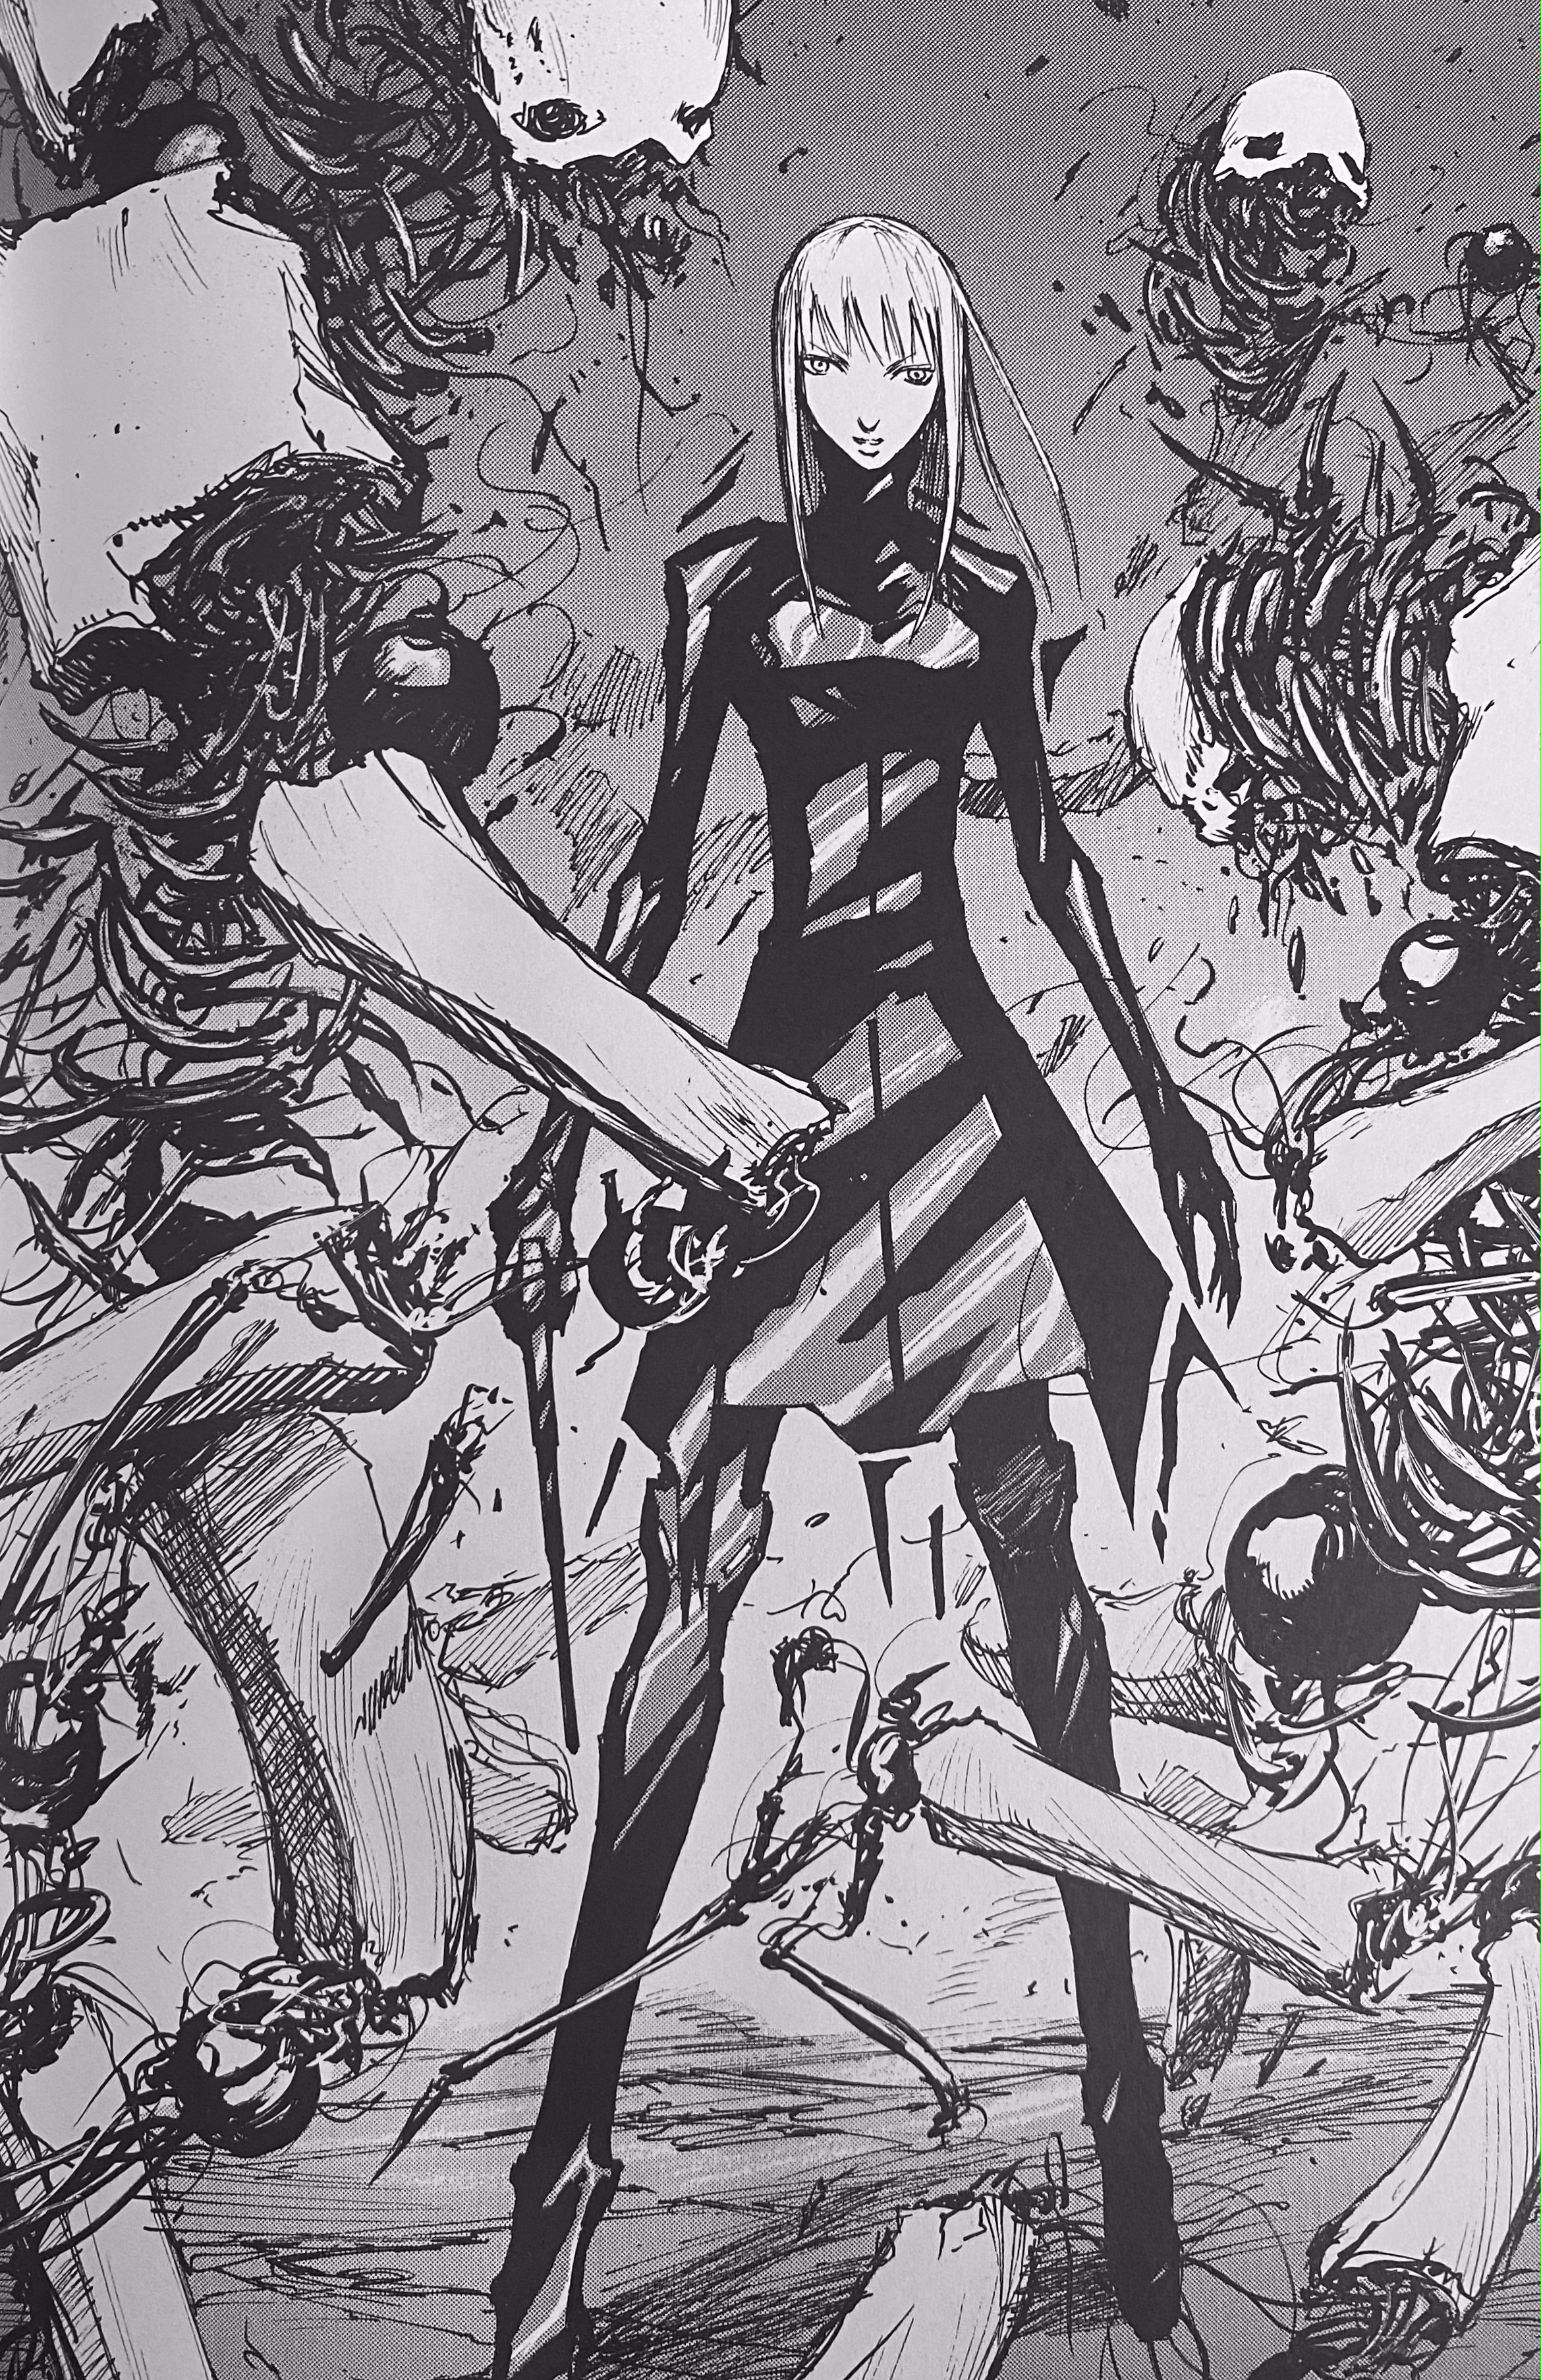 shes just soooooooooo cool. i love her with my whole heart and this scene especially <br><br> [image id: a page from blame! showing cibo surrounded by exploding silicon lifeforms. she stands still in the center of the frame, wearing a sleek black dress that flares outt and ends at her knees, and is holding an electric baton-like weapon. the silicon life forms around her are torn apart, their faces shattered and wires fraying from the ends of their limbs. /end id]